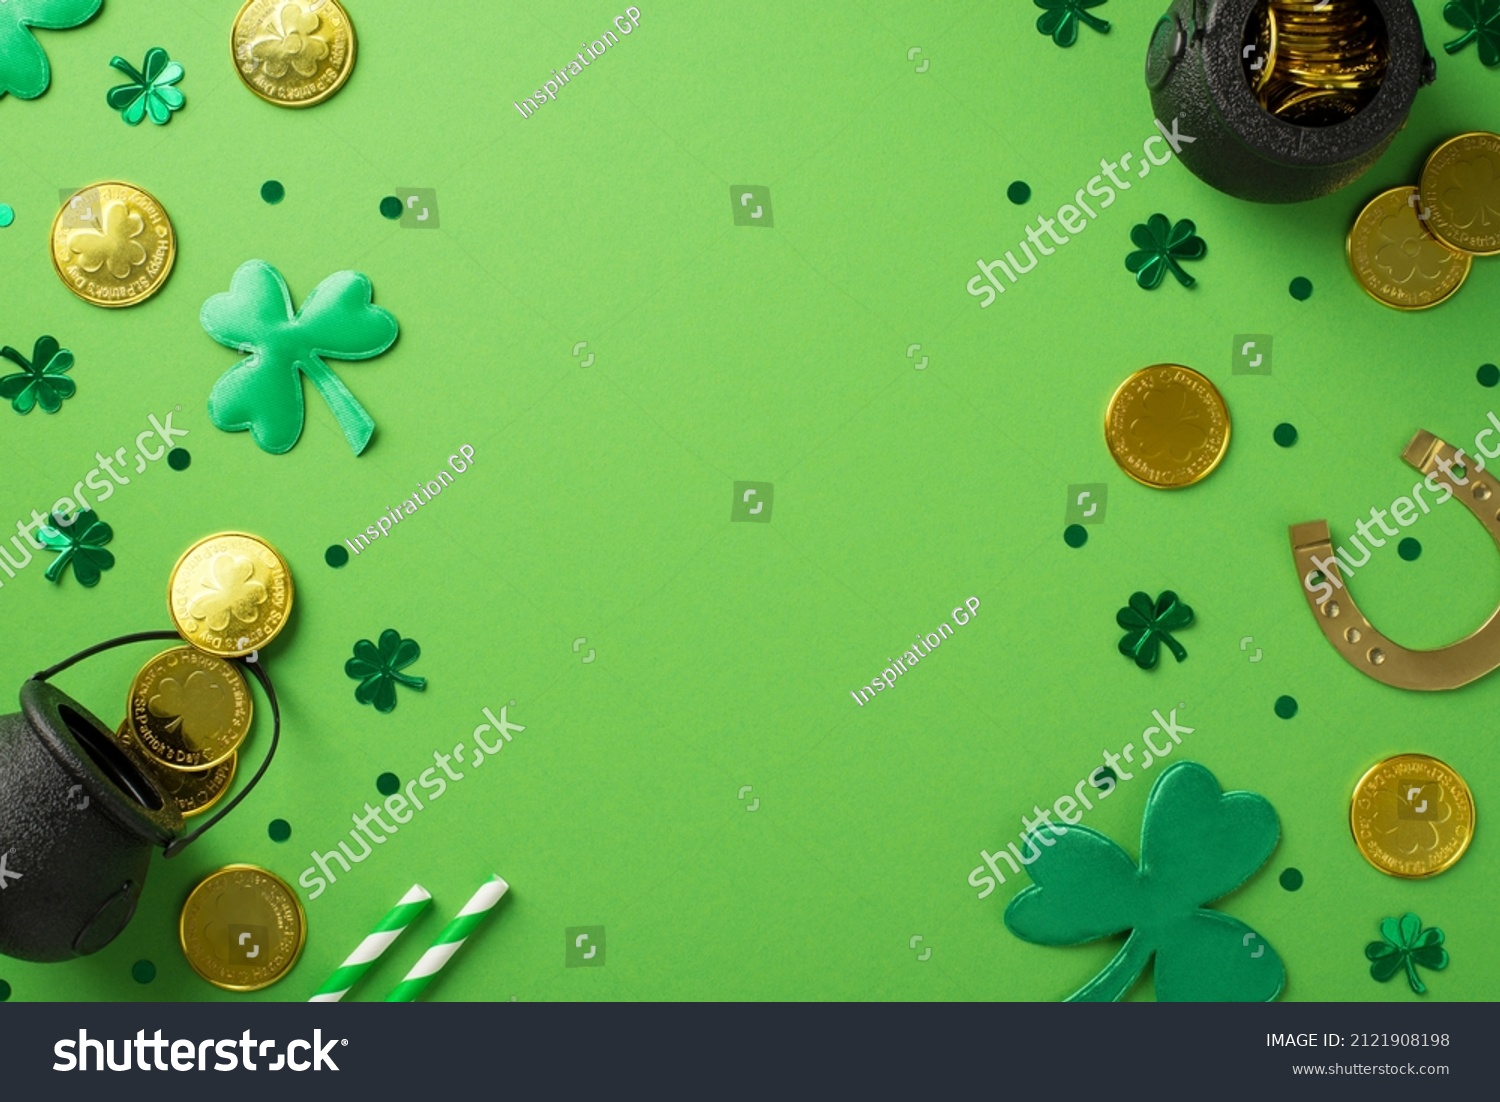 Top view photo of st patrick's day decorations pots with gold coins green shamrocks horseshoe straws and trefoil shaped confetti on isolated pastel green background with copyspace #2121908198